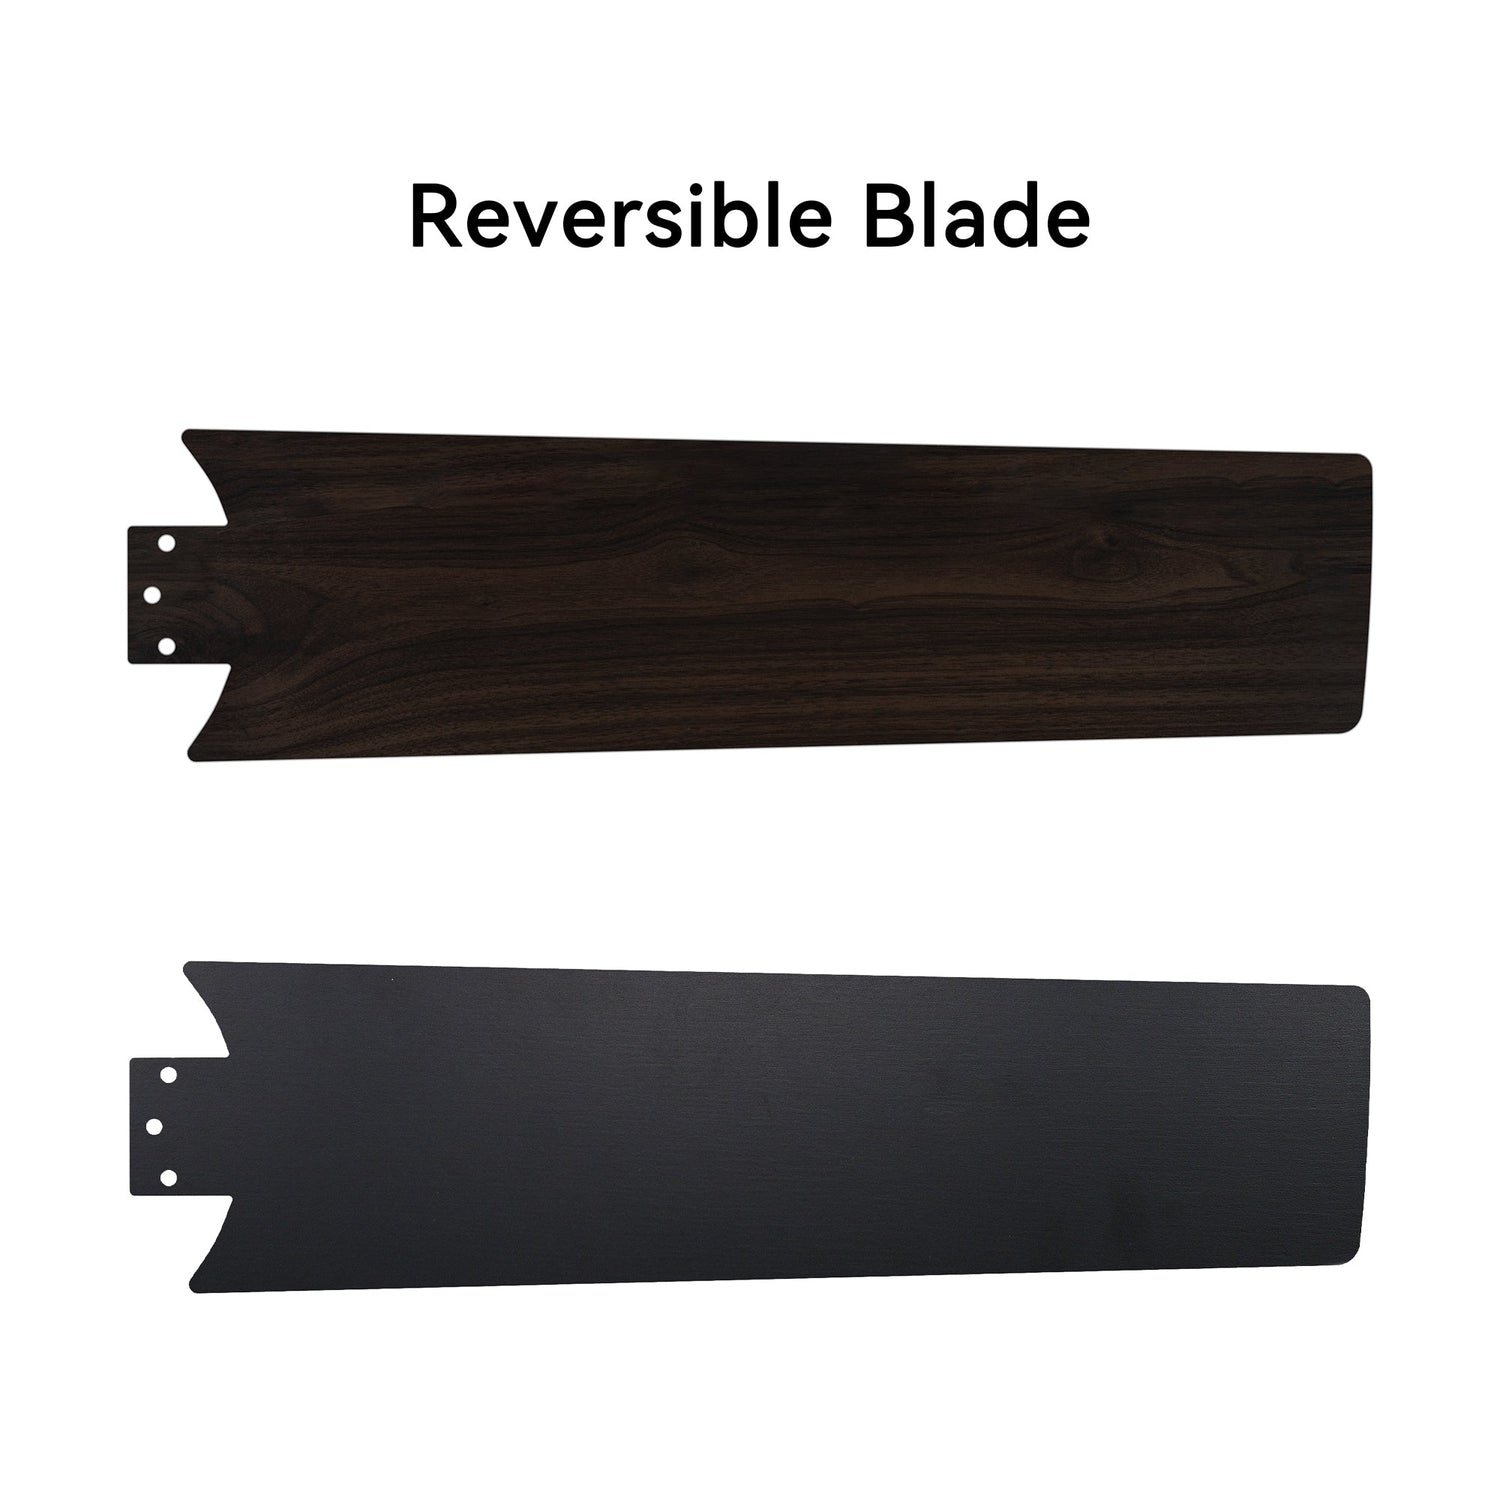 Black Low profile ceiling fan with reversible plywood blades, such as matte black and dark wood pattern. 